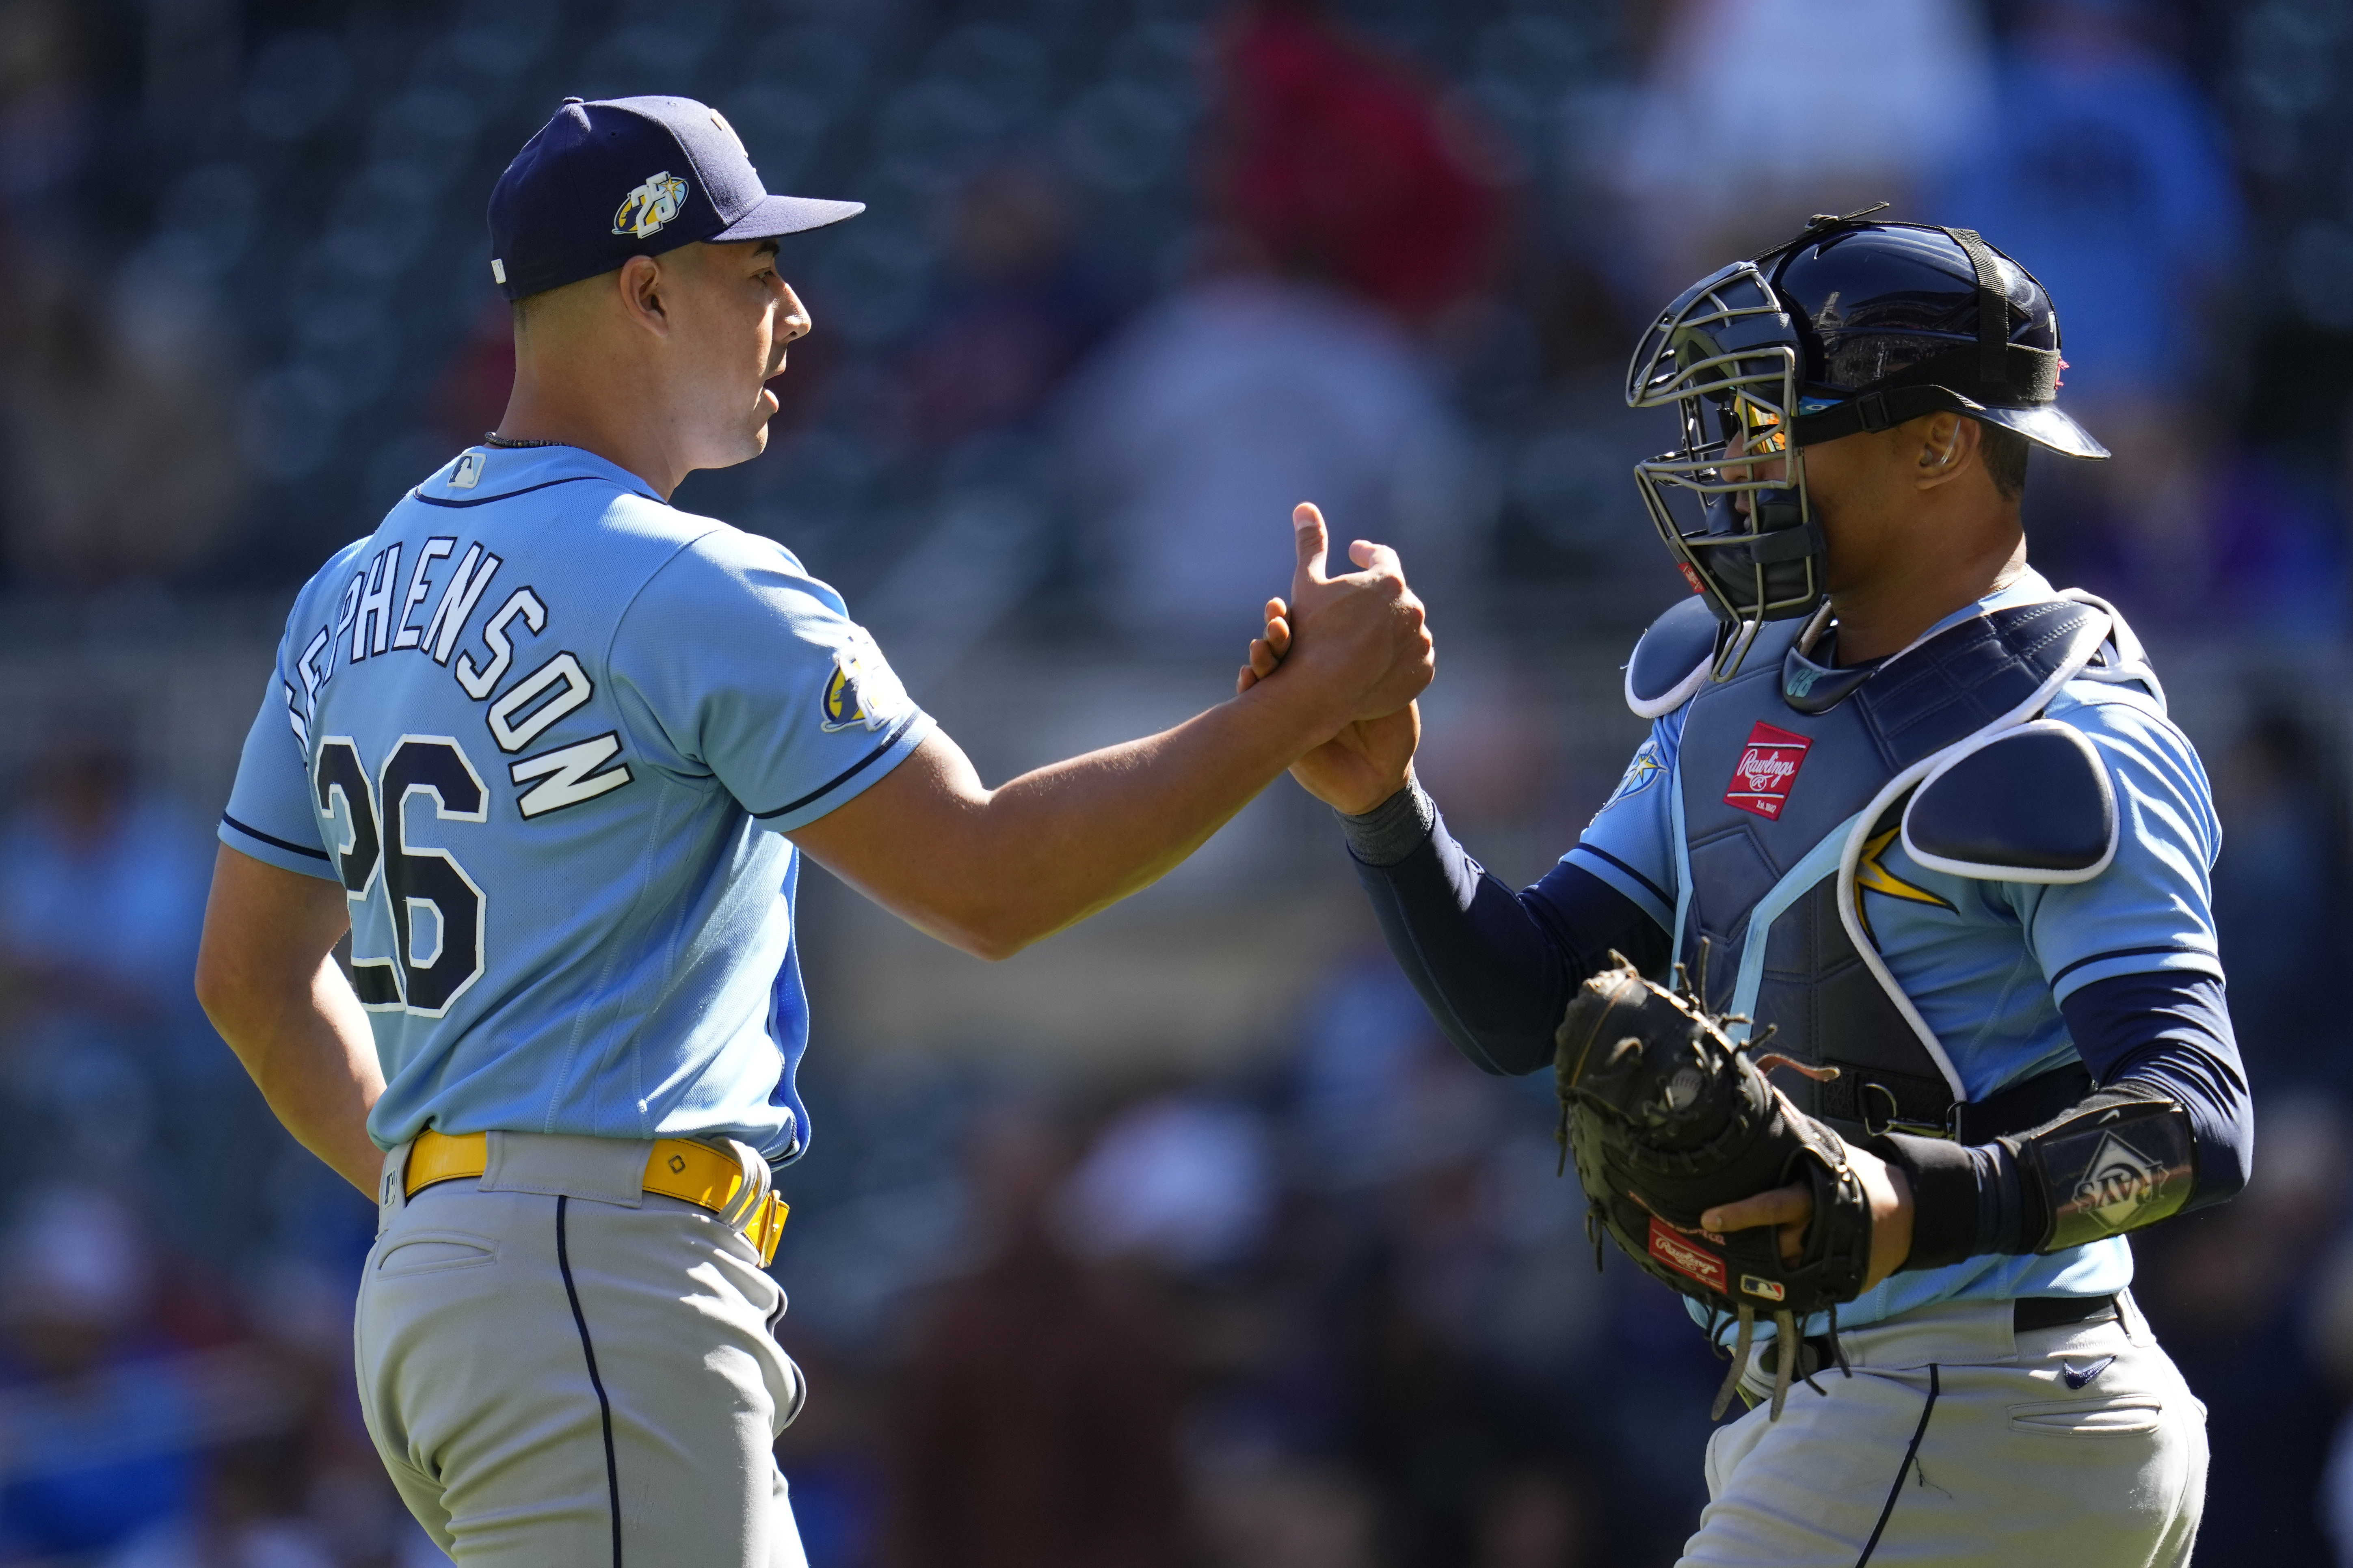 Rays top Twins 5-4 on Arozarena's 9th-inning homer to head into